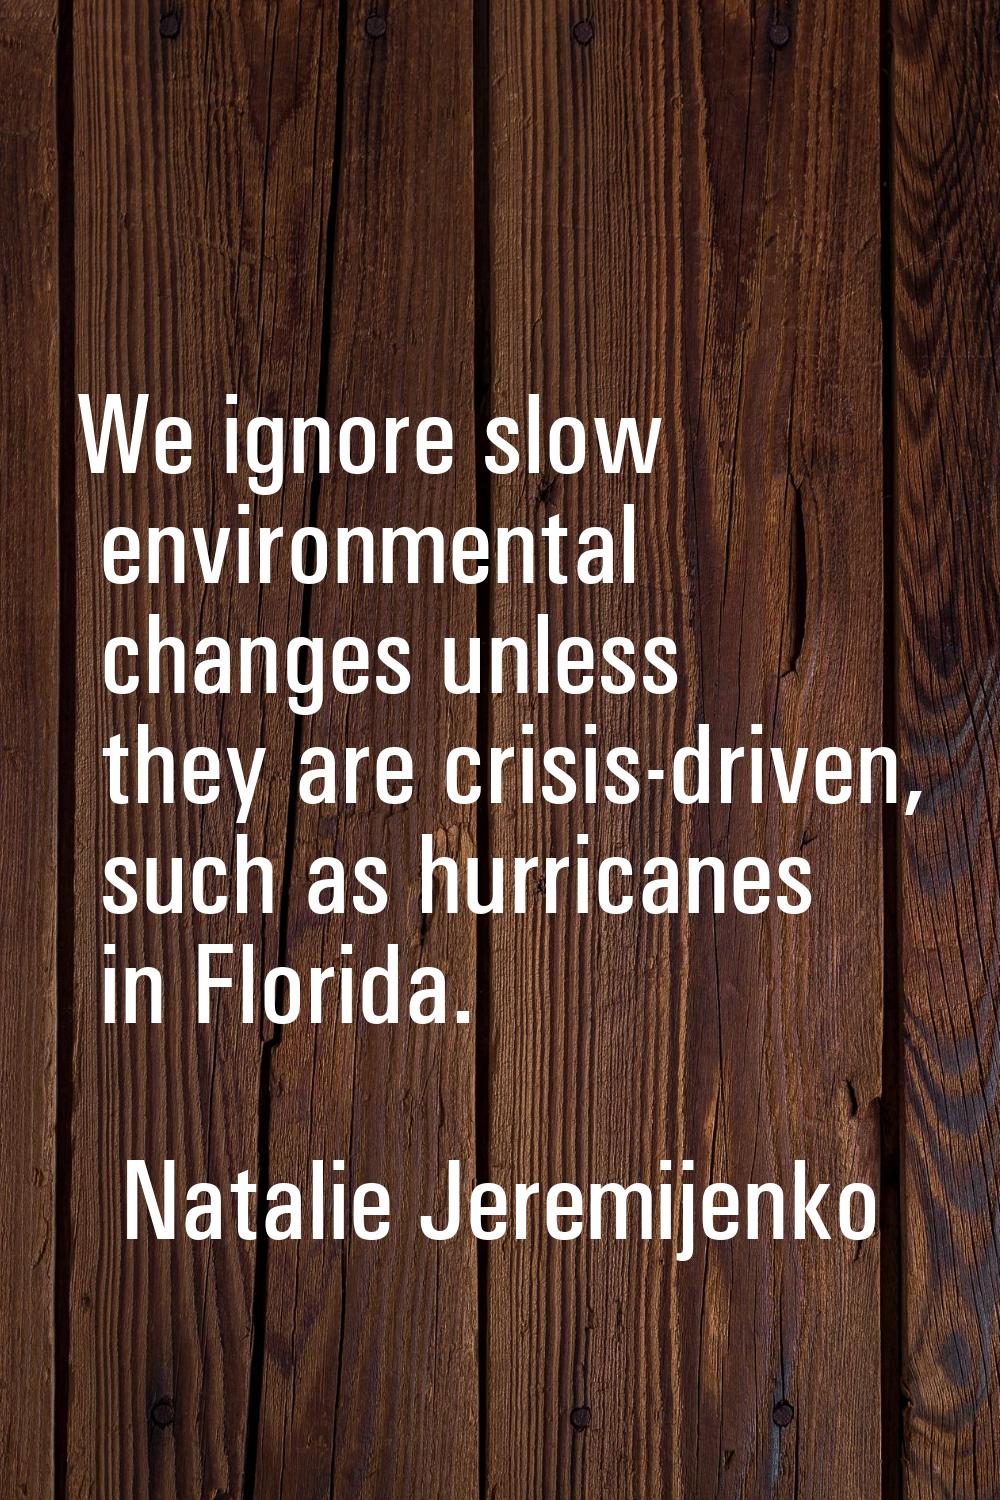 We ignore slow environmental changes unless they are crisis-driven, such as hurricanes in Florida.